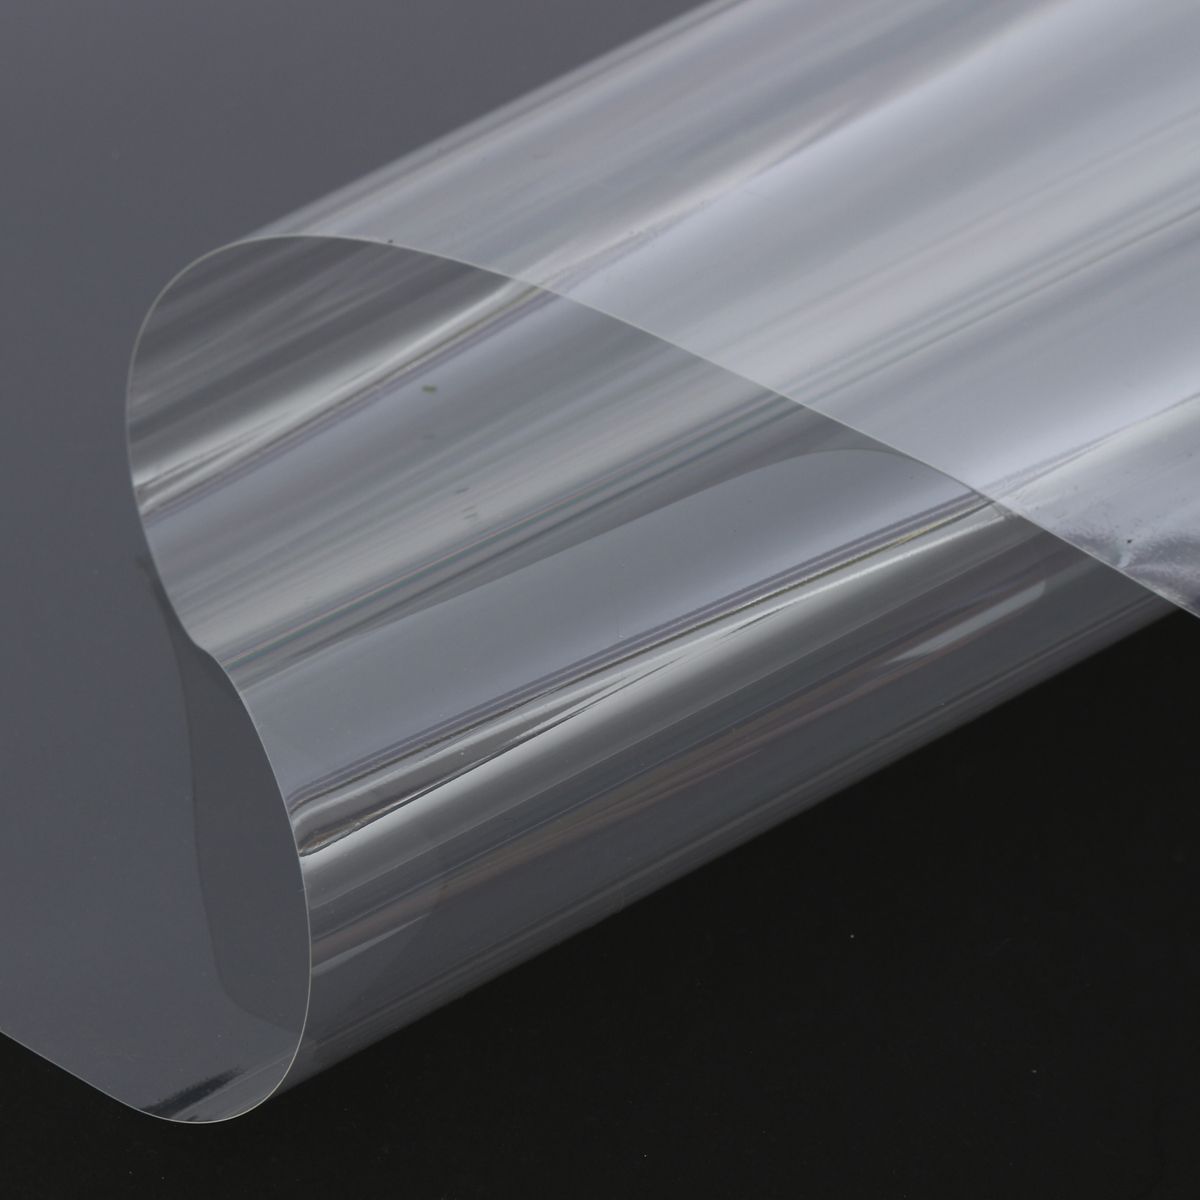 2M-4Mil-Safety-Anti-Shatter-Clear-Window-Blind-Film-Glass-Protector-Home-Safety-1588169